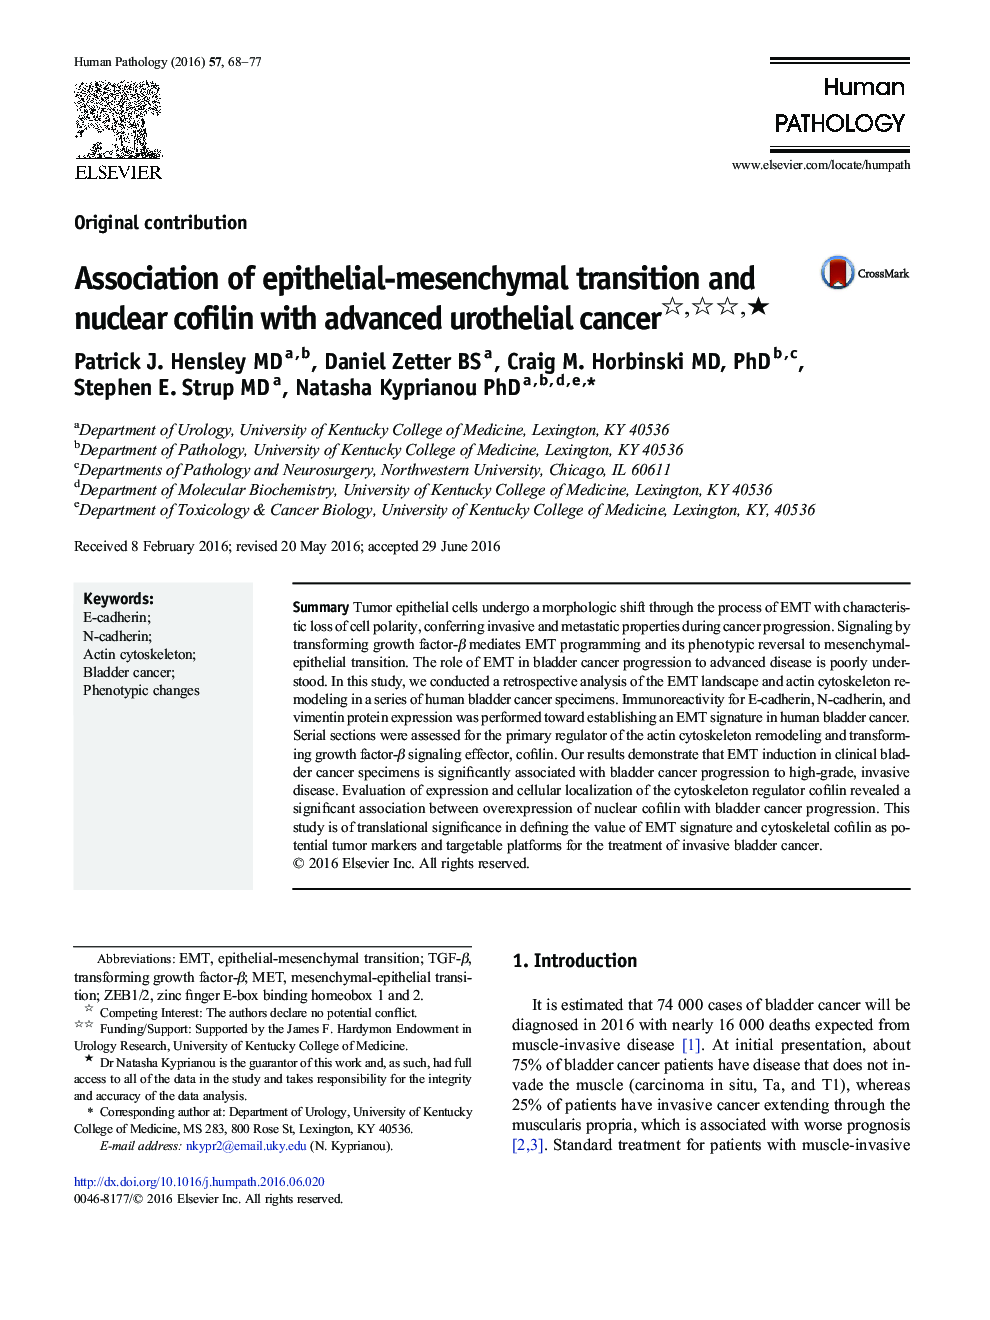 Association of epithelial-mesenchymal transition and nuclear cofilin with advanced urothelial cancerâ